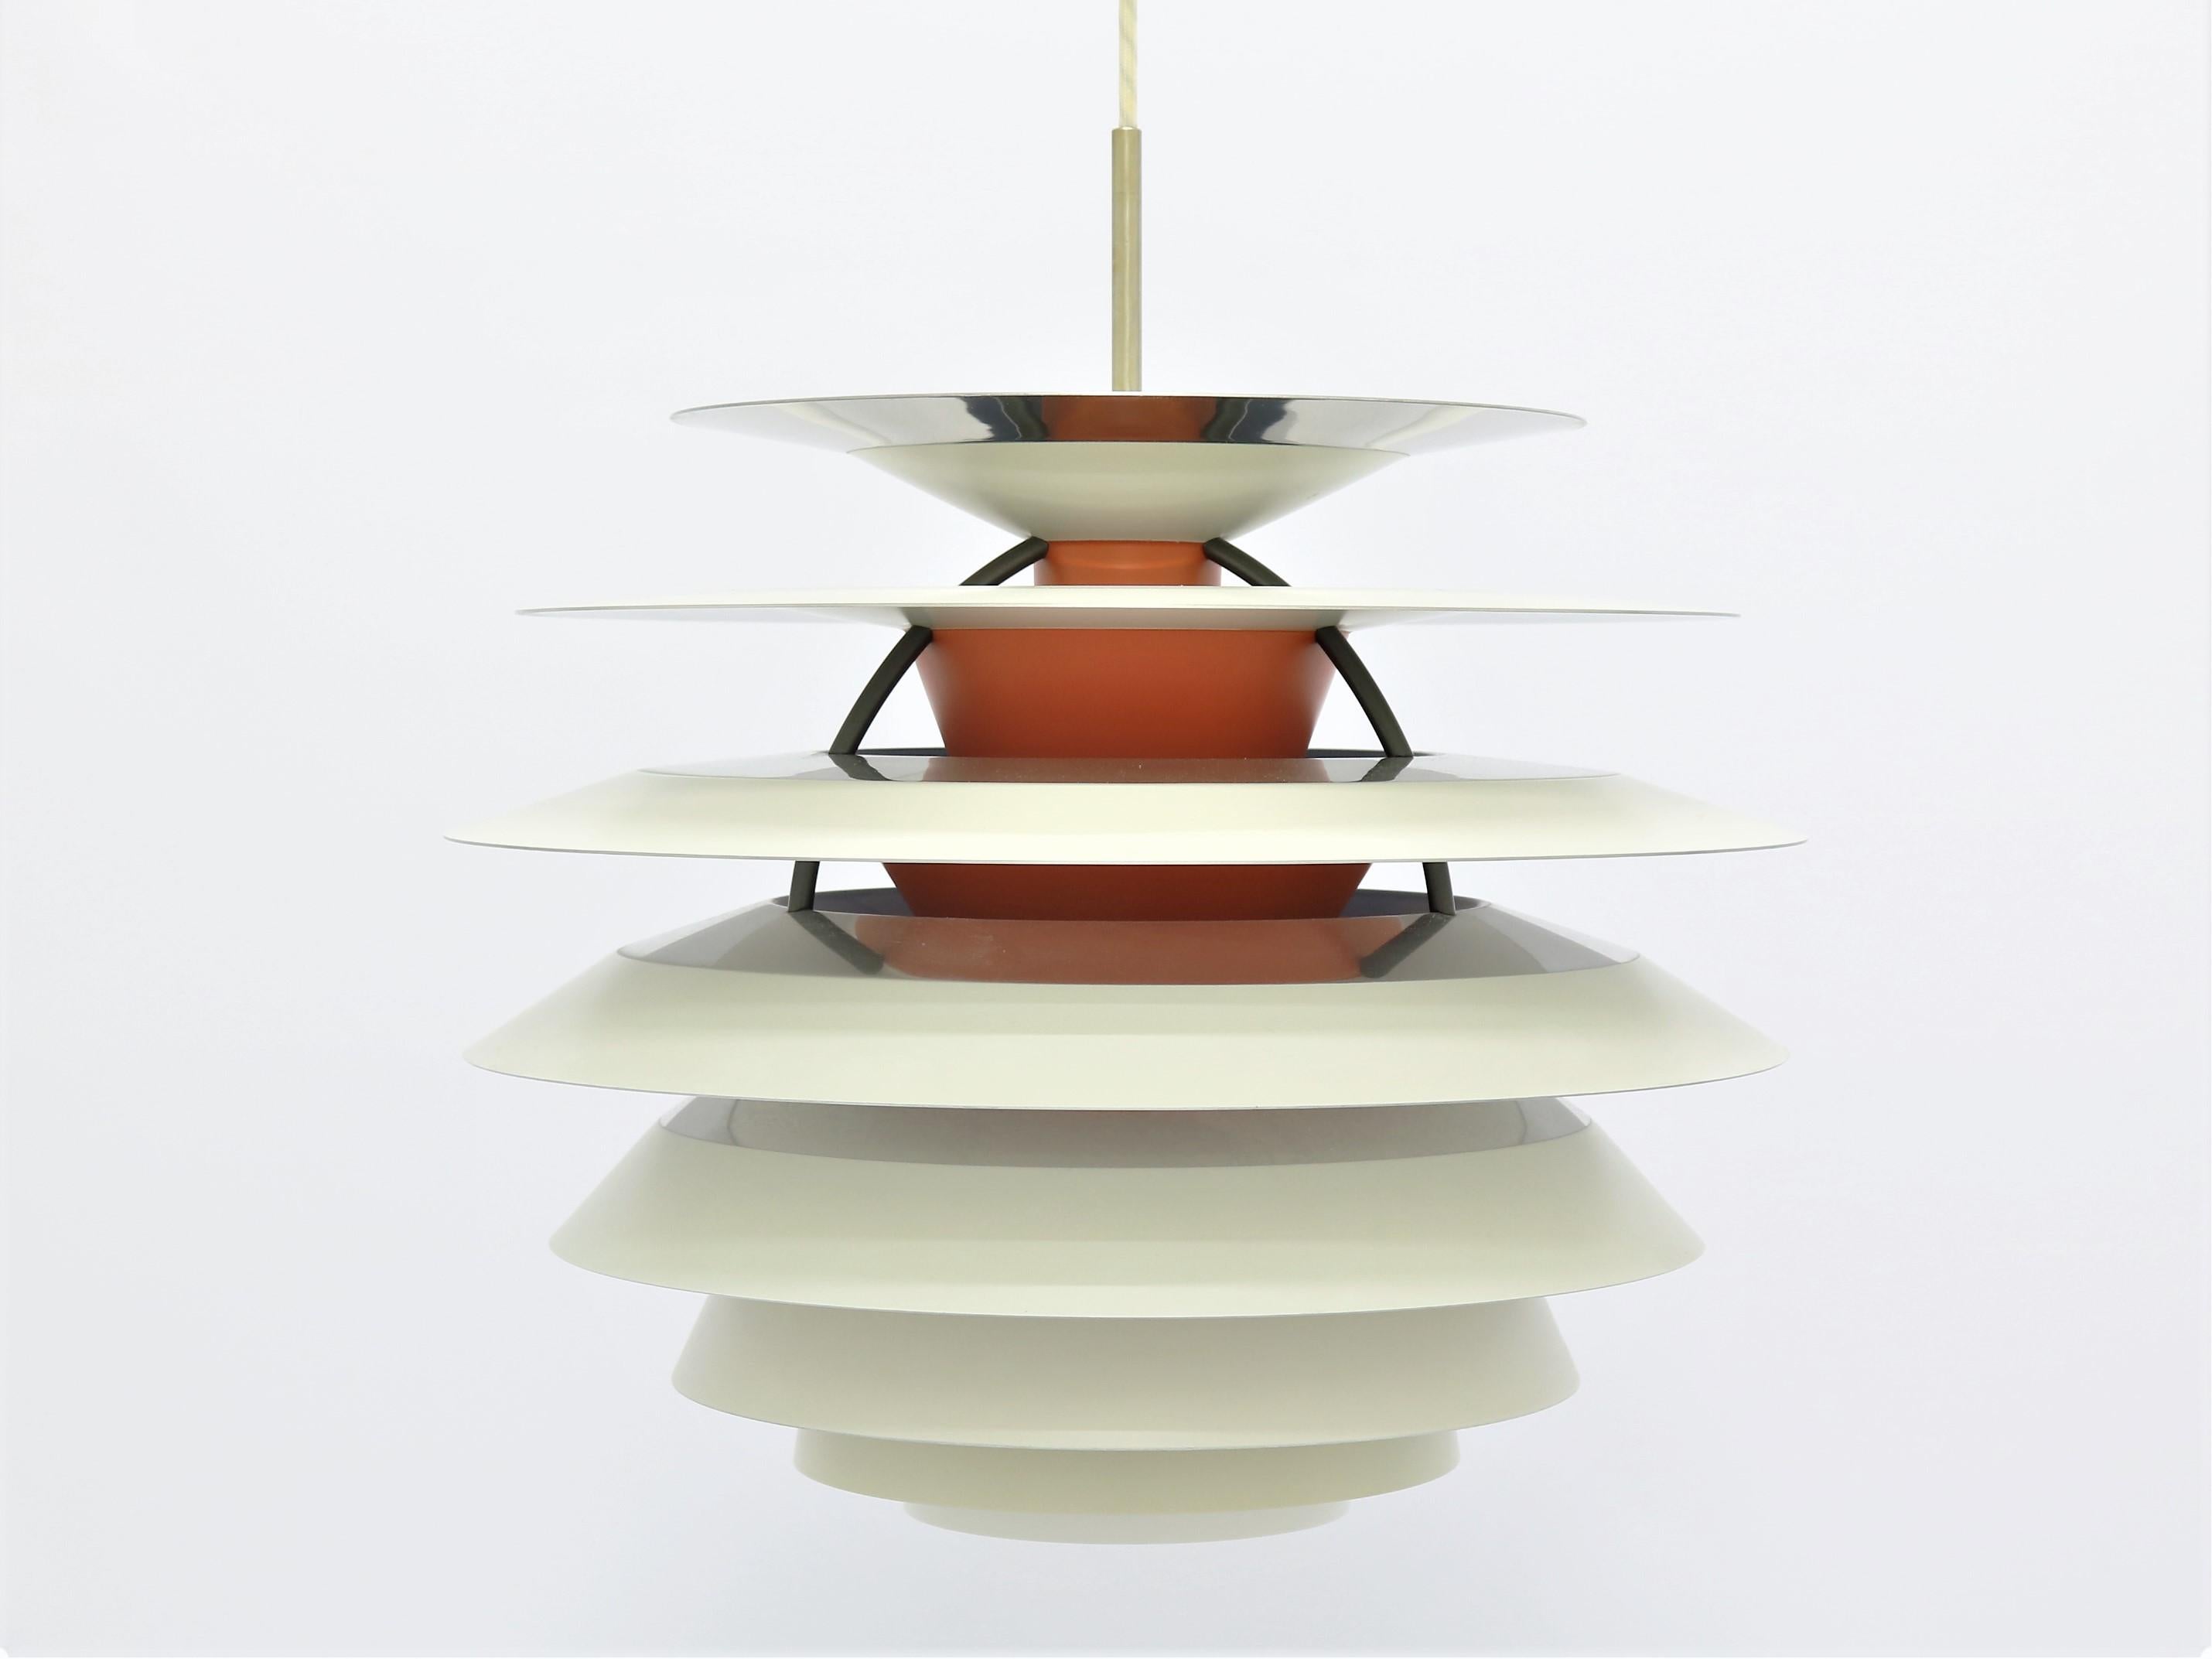 Iconic piece of design from Poul Henningsen. The PH 